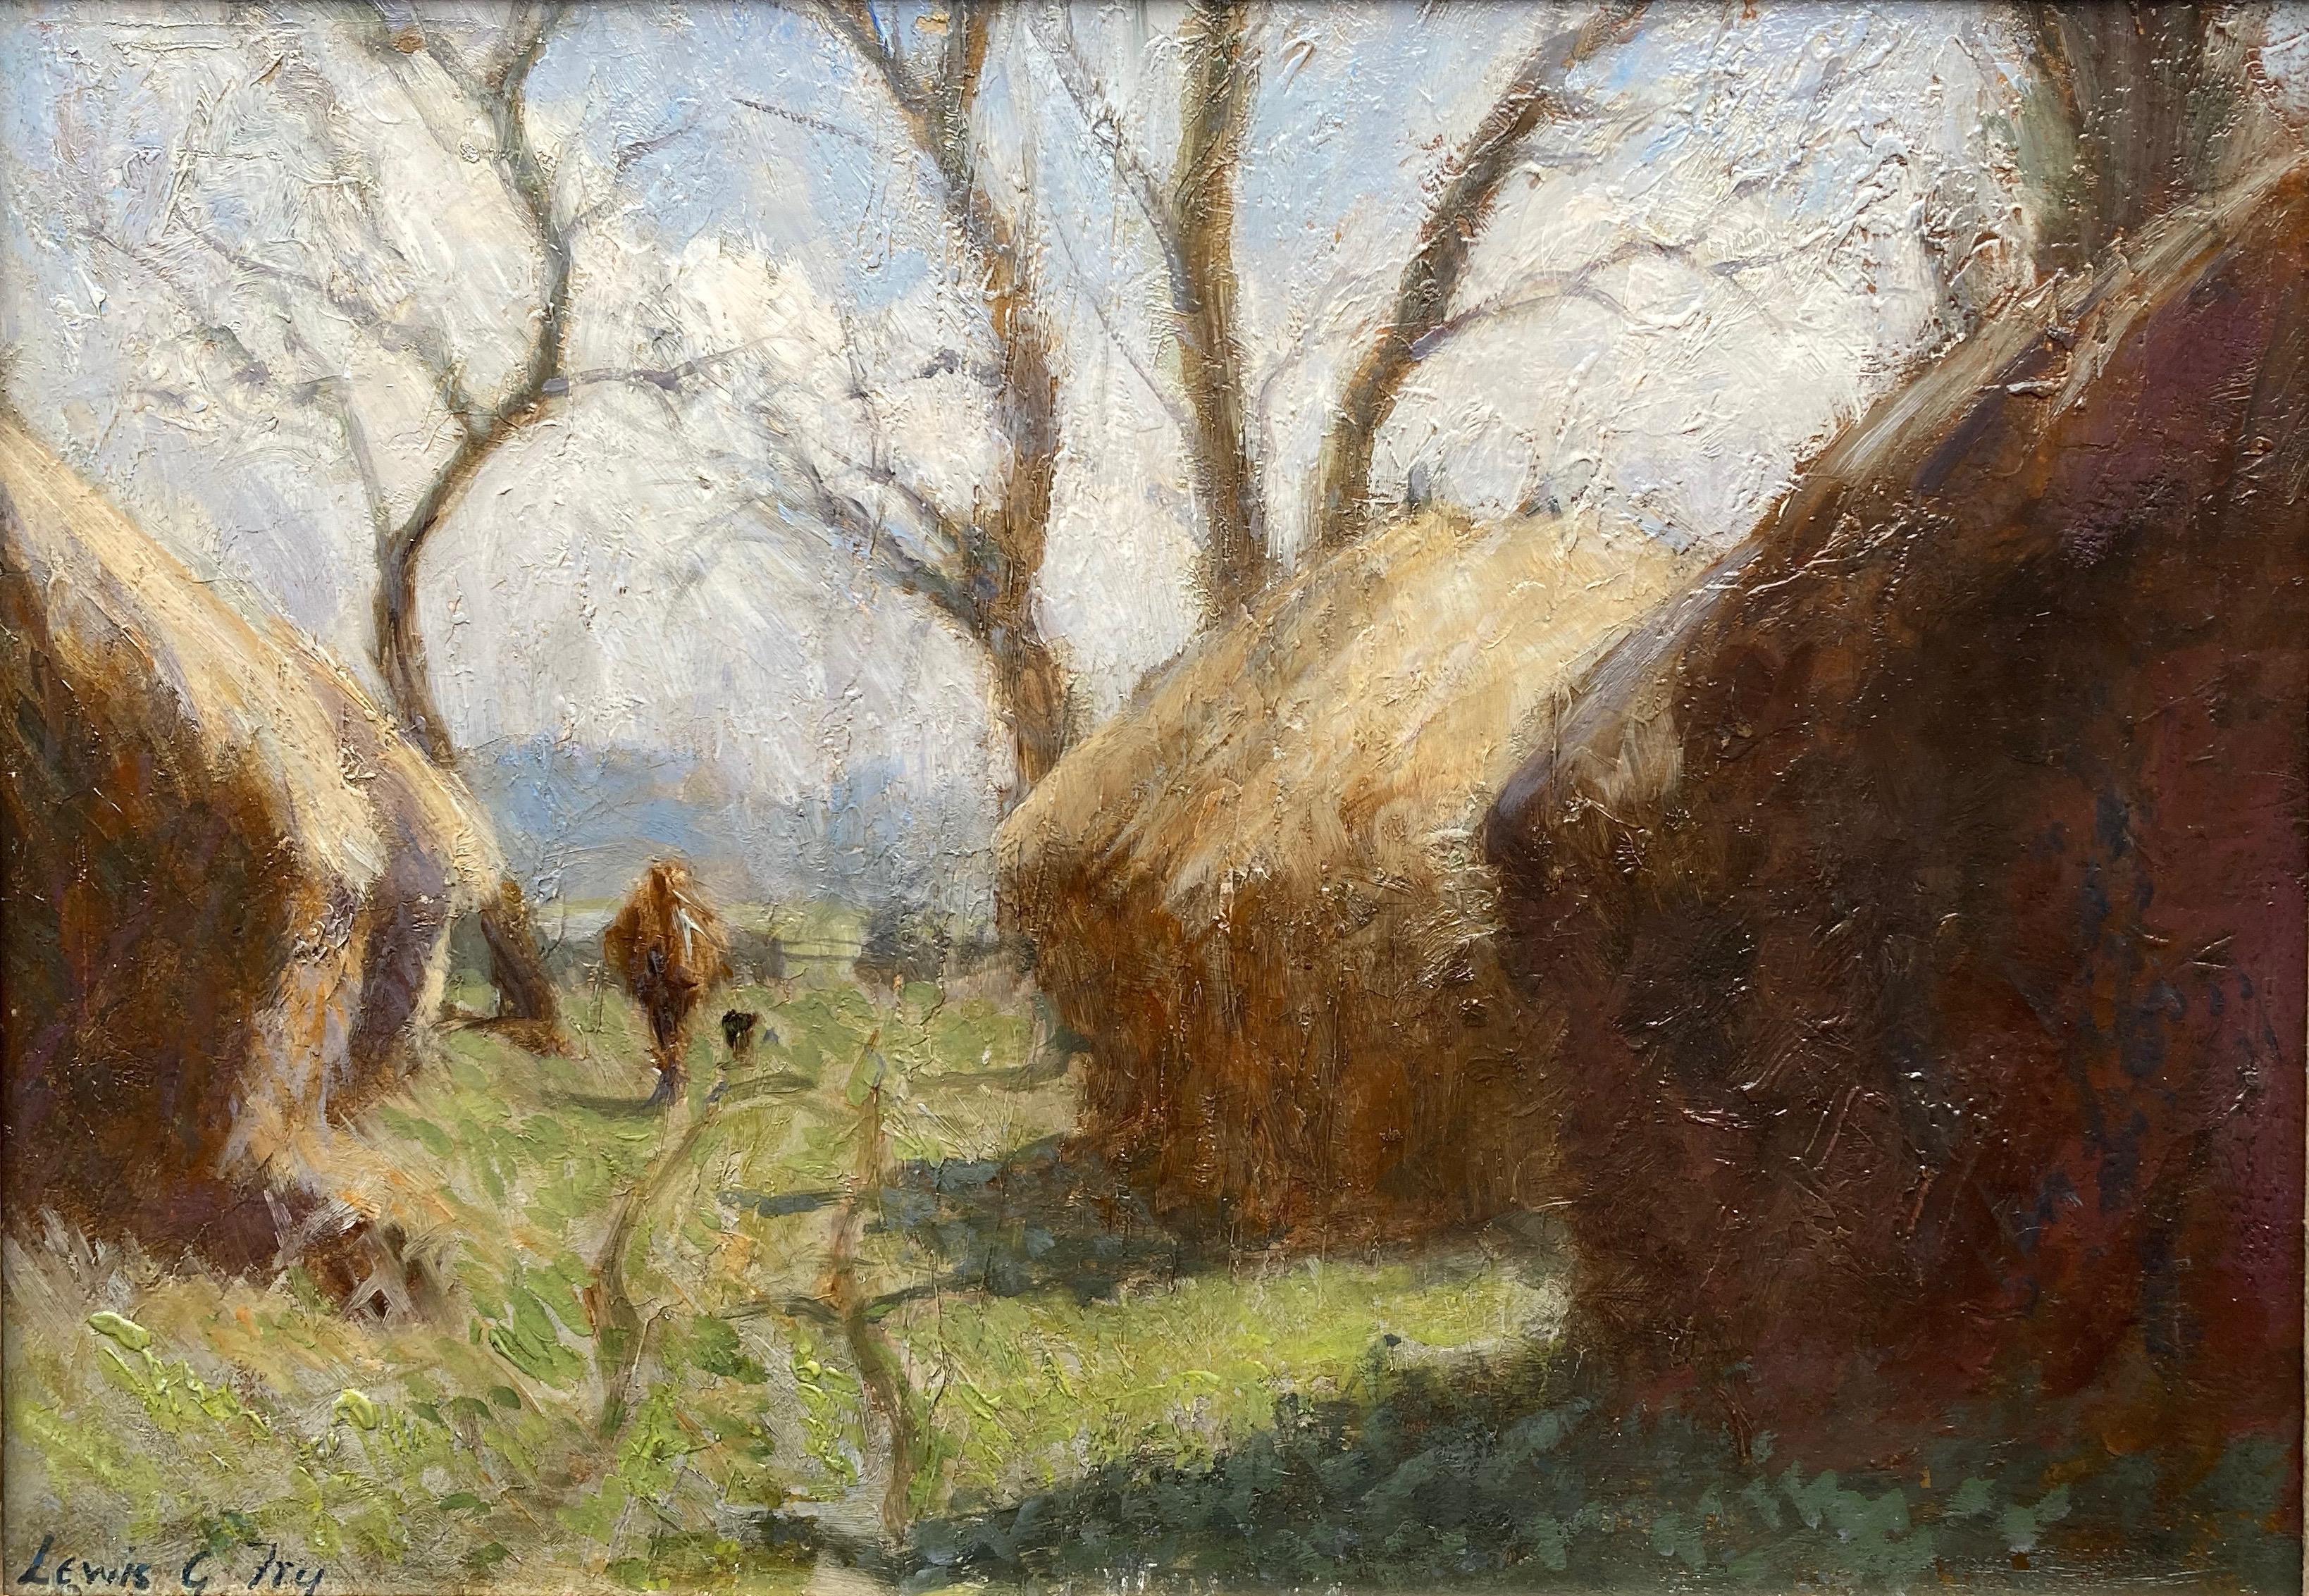 A wonderfully atmospheric view of a harvest scene painted in a most attractive impressionistic style.

Lewis George Fry (1860-1933)
A figure walking by haystacks, Limpsfield
Signed
Oil on panel
9¾ x 14 inches

Landscape painter. Born at Clifton,